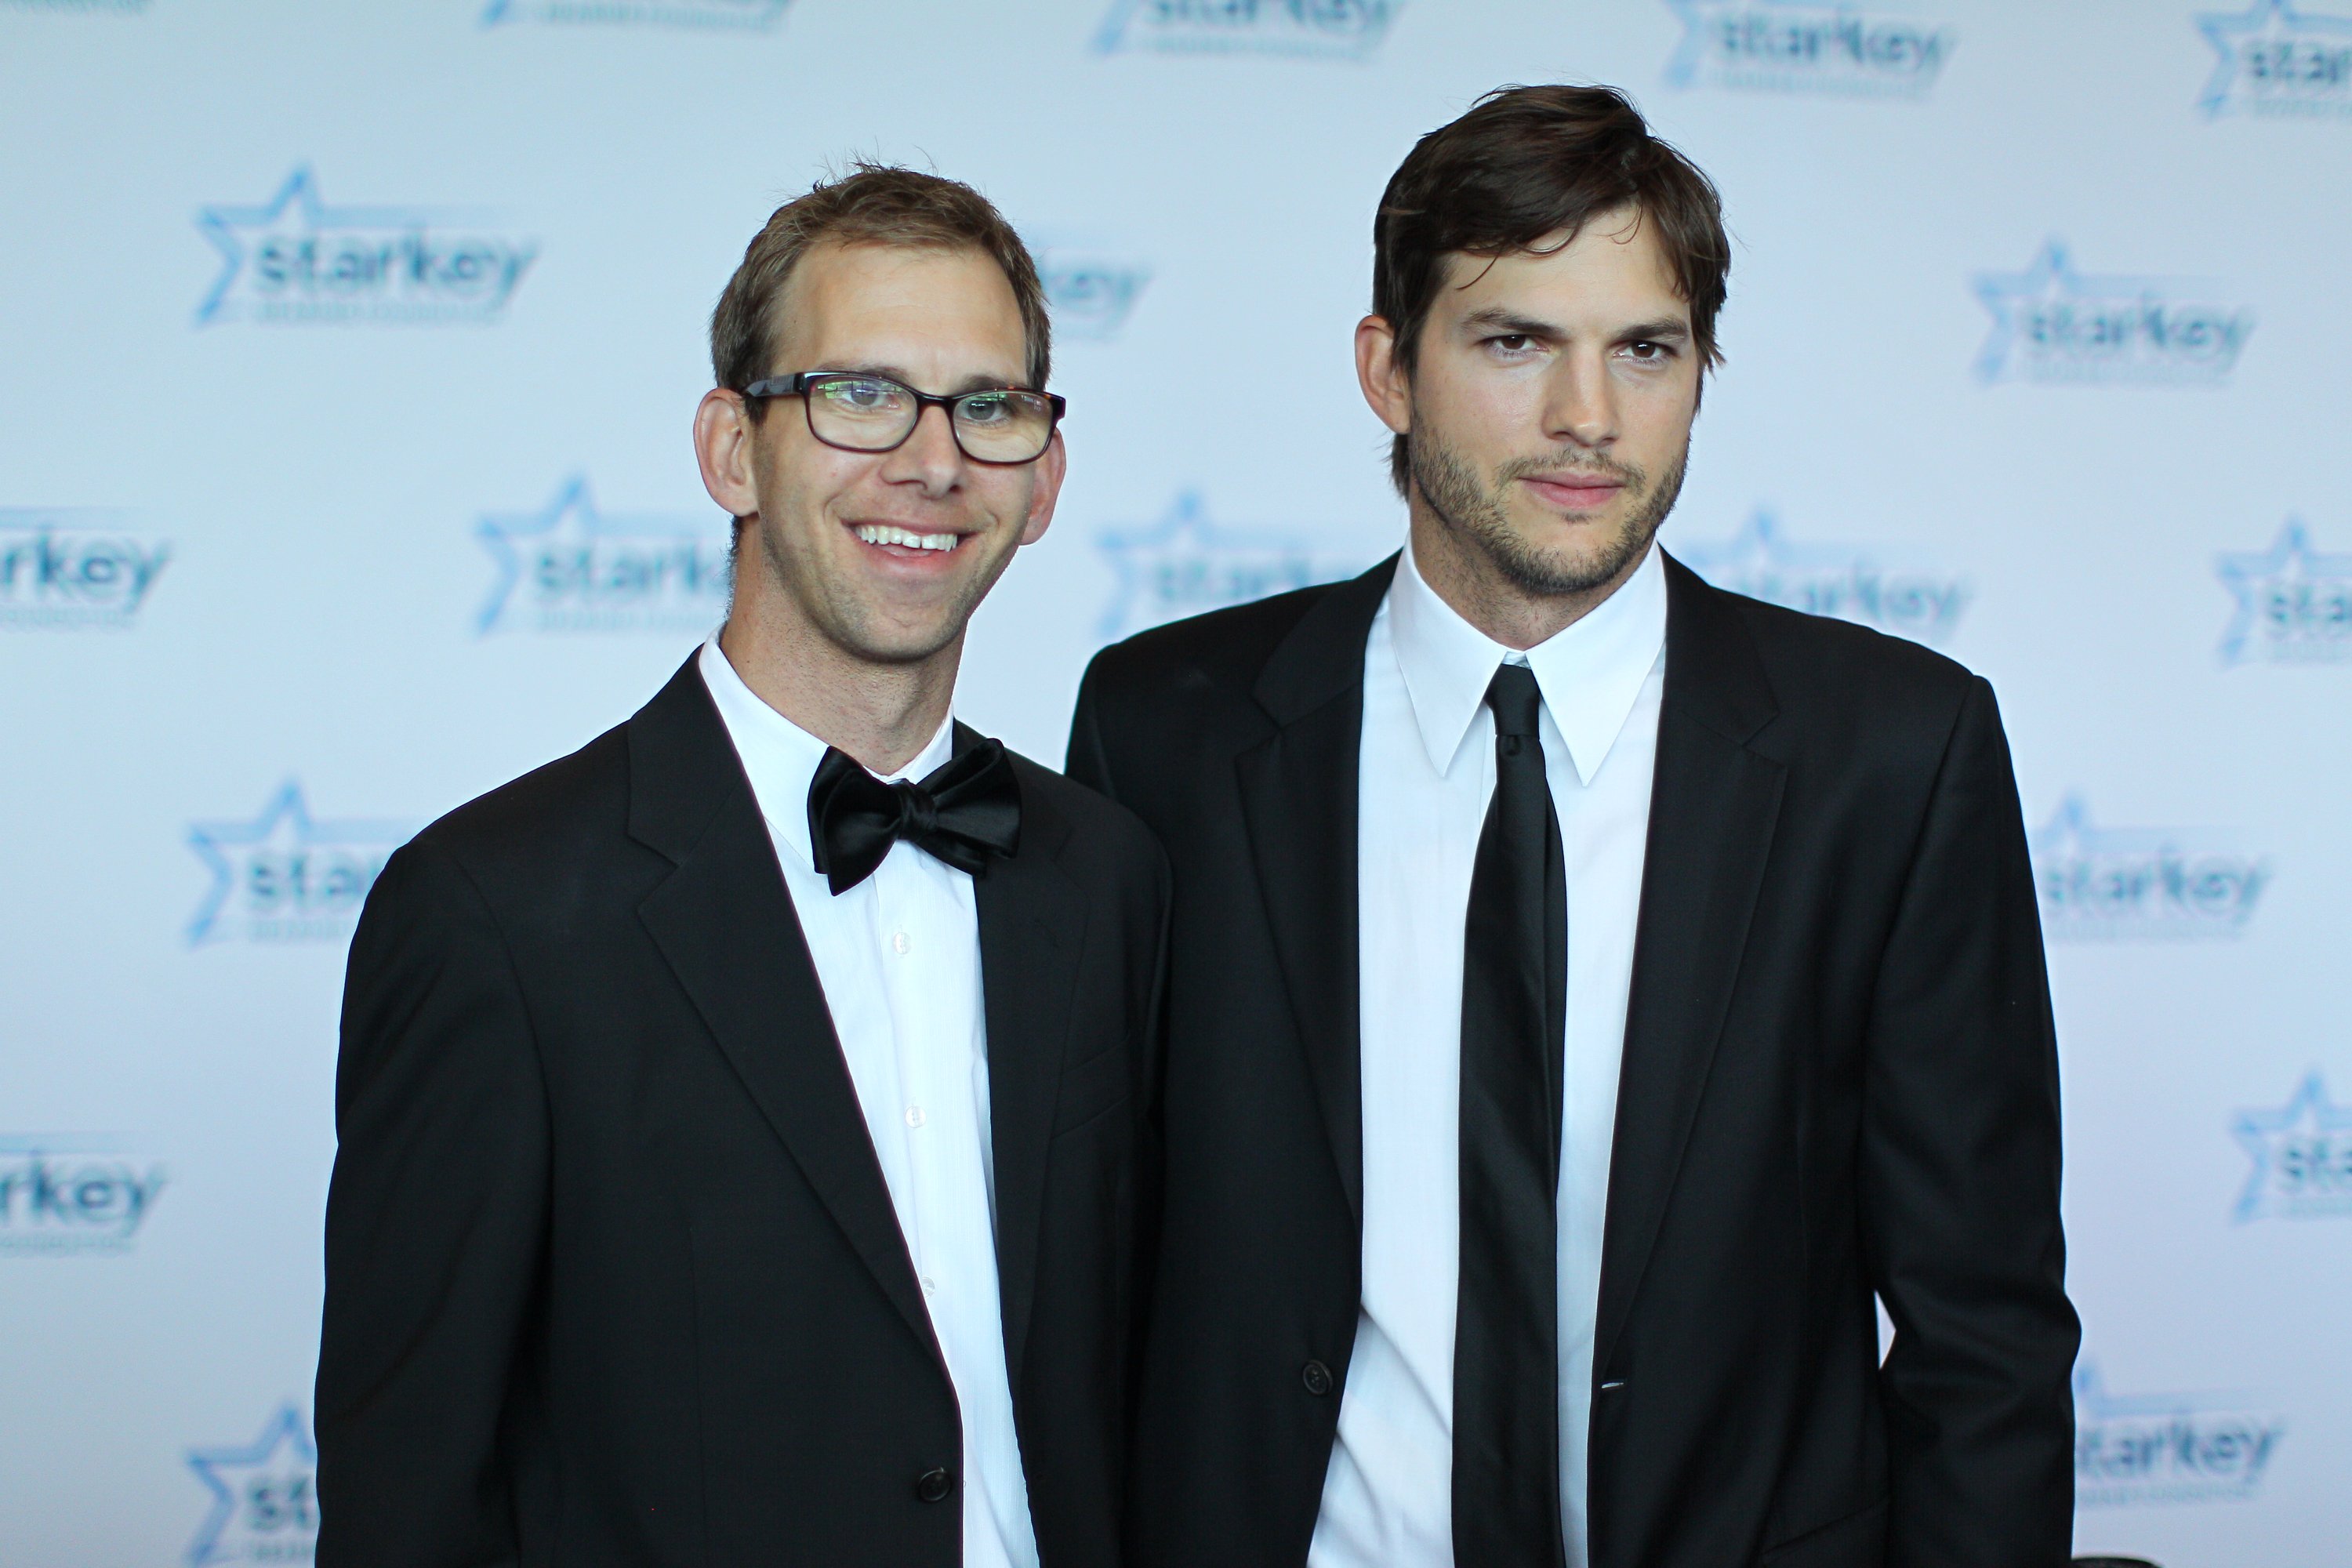 Michael Kutcher and Ashton Kutcher walk the red carpet on July 28, 2013 in St. Paul, Minnesota. | Source: Getty Images